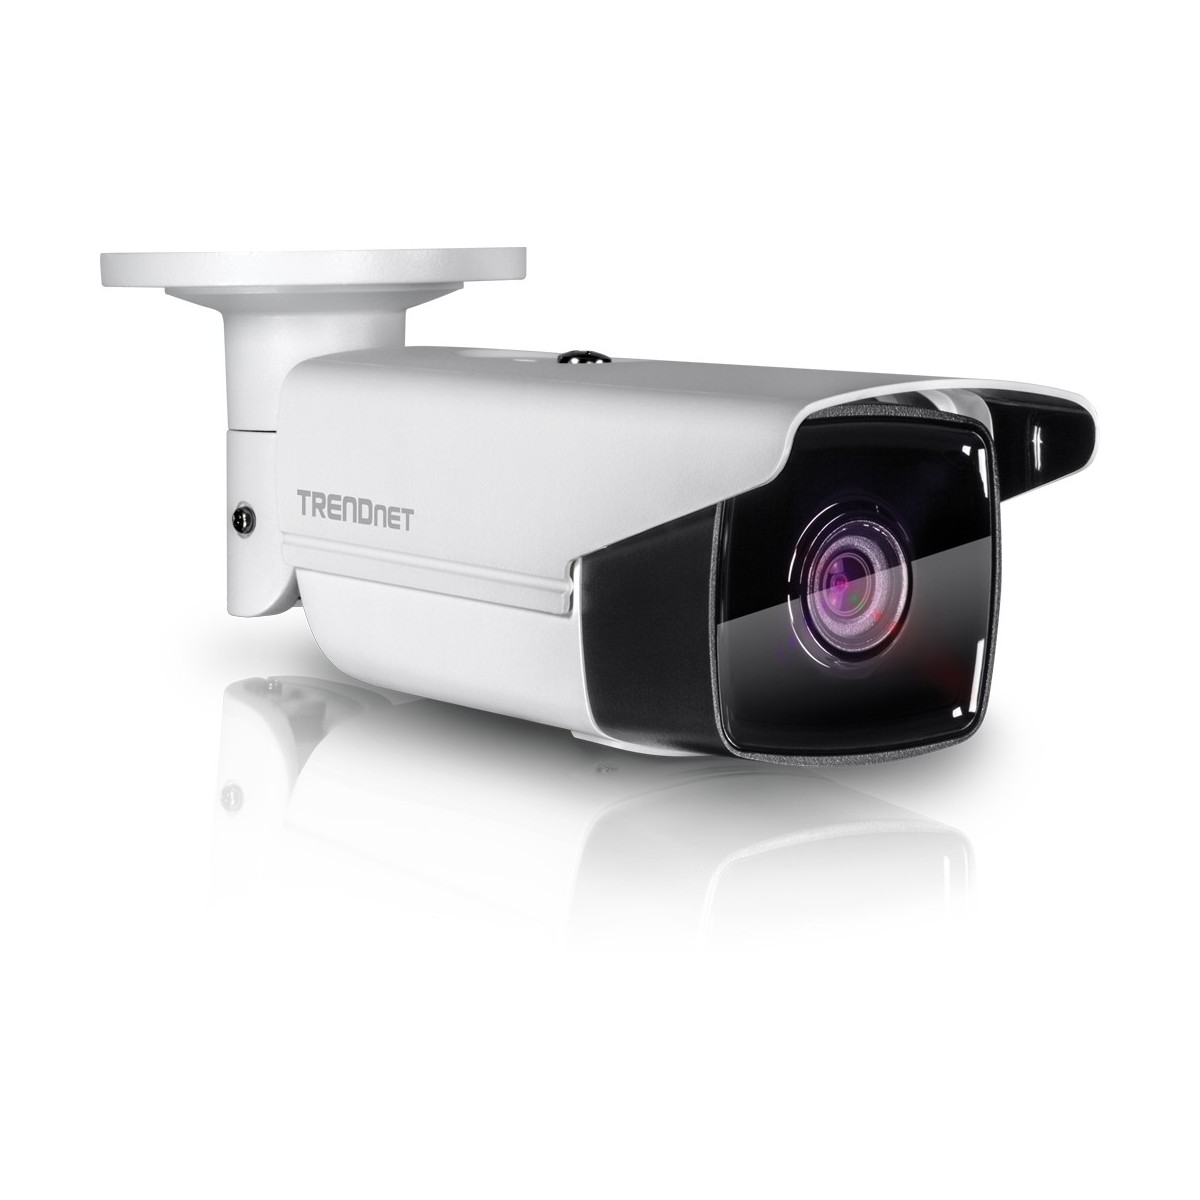 TRENDnet TV-IP1313PI - IP security camera - Indoor  outdoor - Wired - German - English - Spanish - French - Portuguese - CE - FC